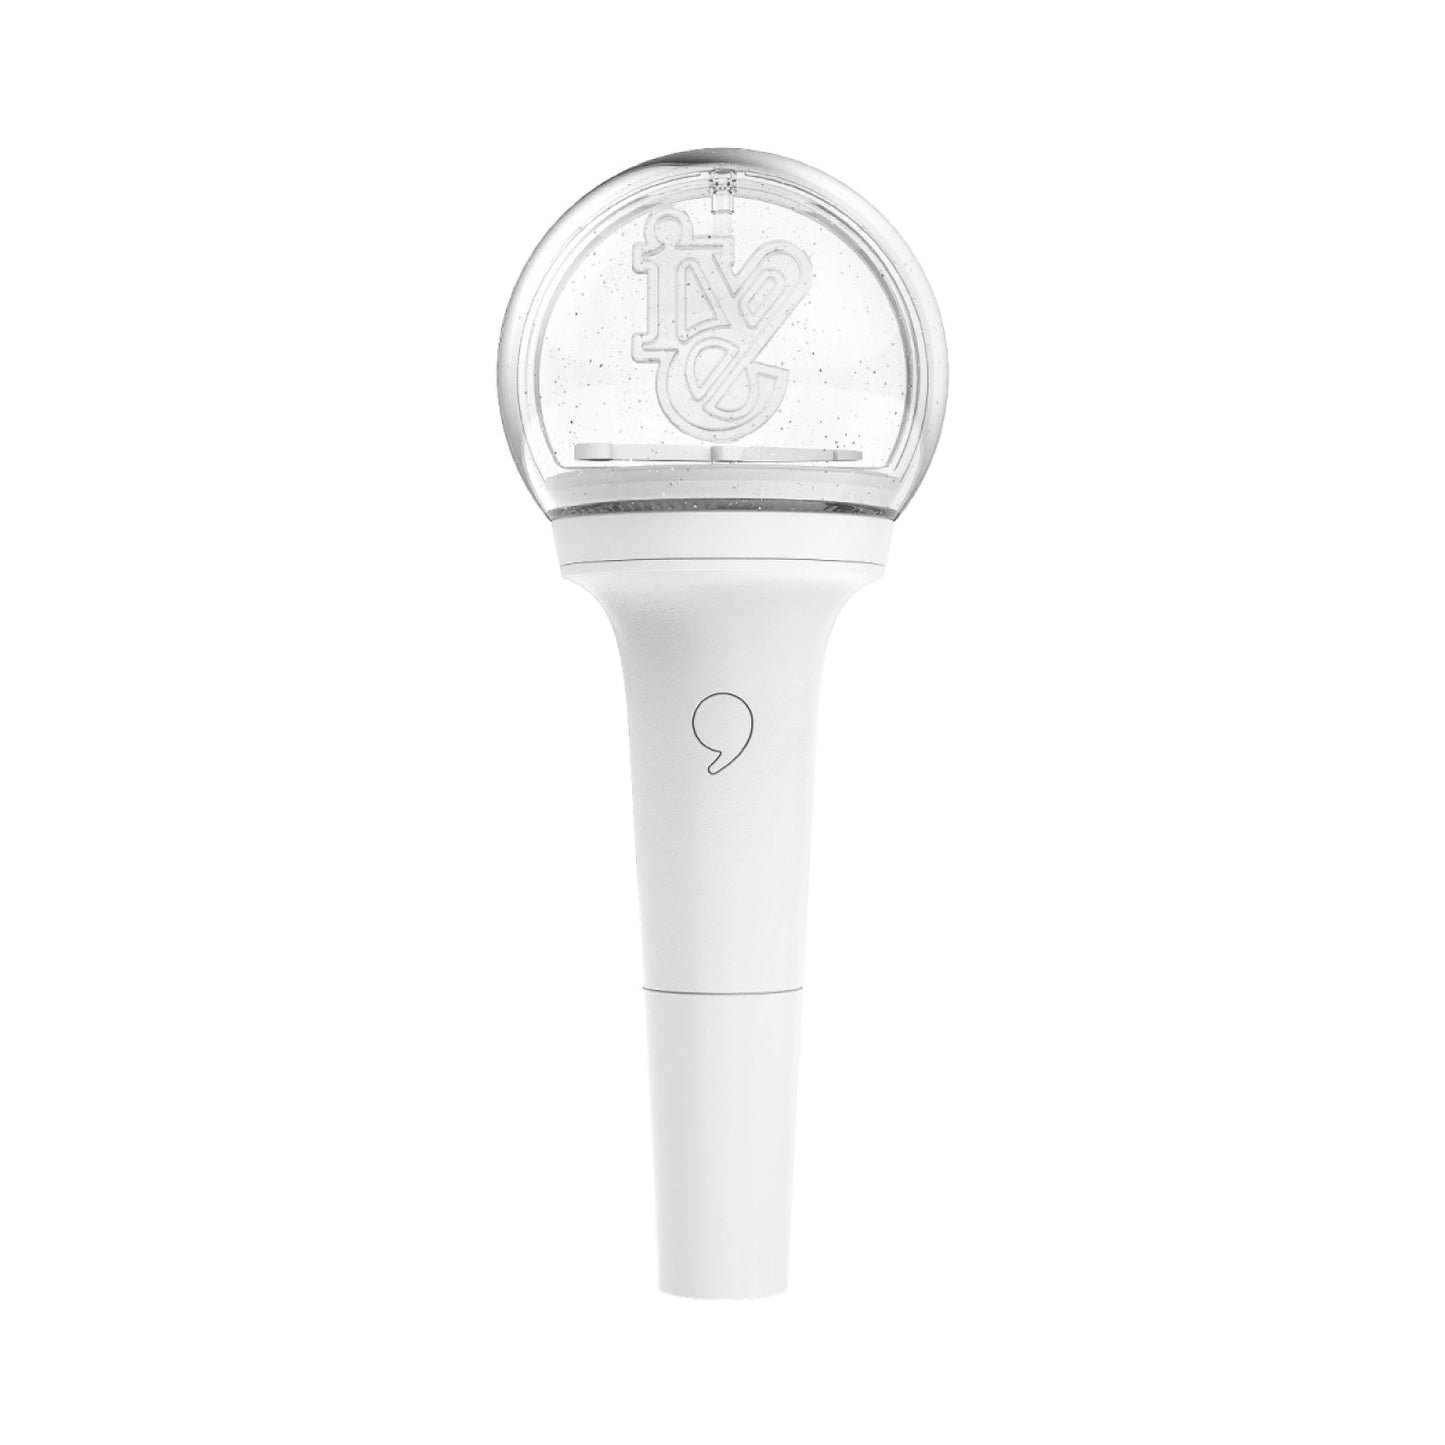 (ONE) IVE - Official Light Stick